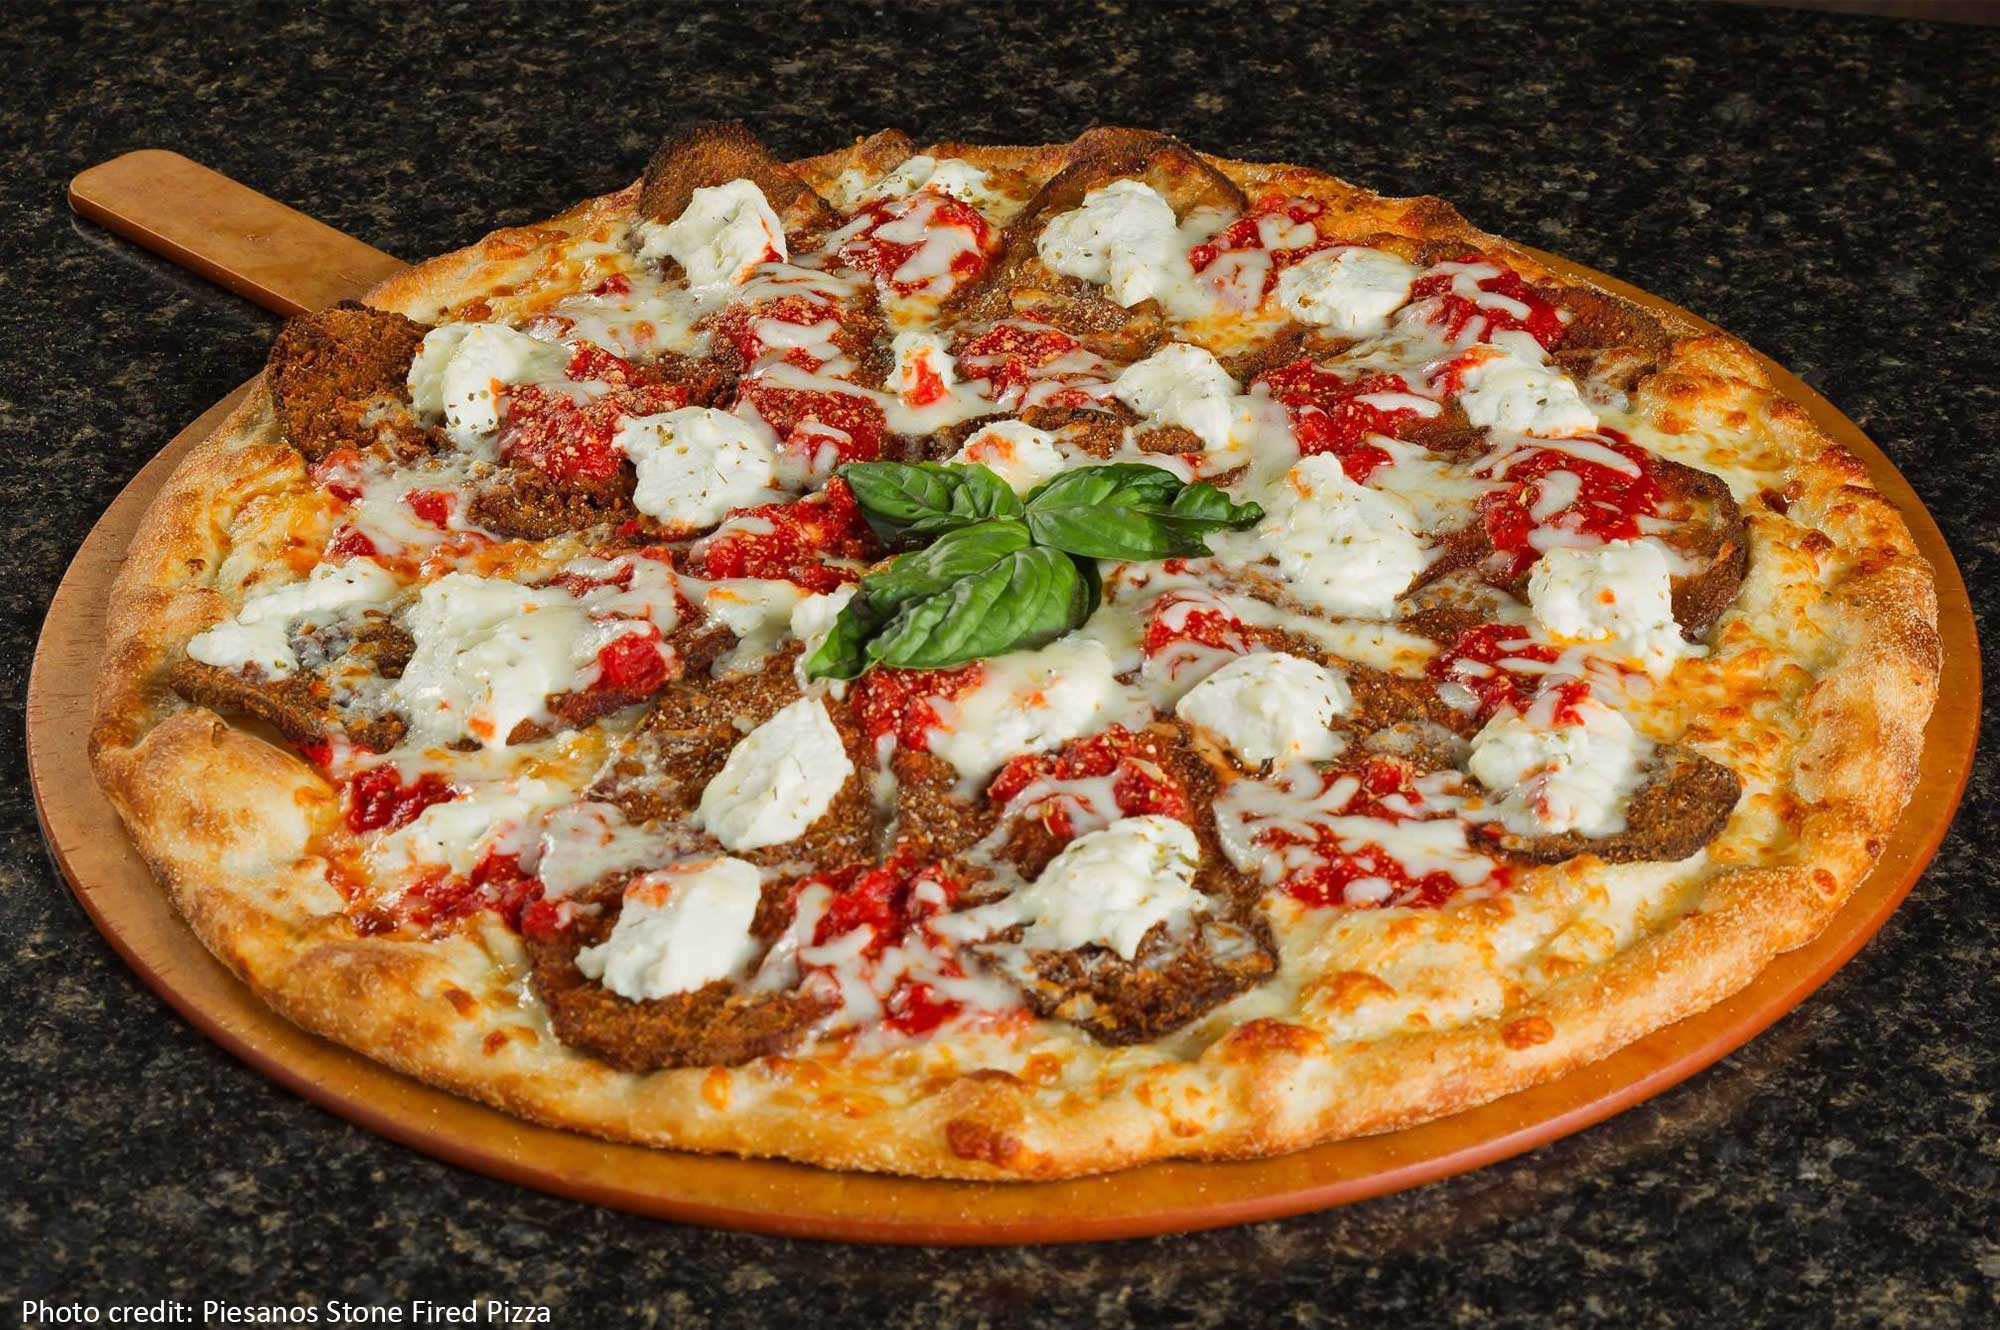 Piesanos Stoned Fired Pizza menu offerings, Gainesville favorite pizza and Italian food